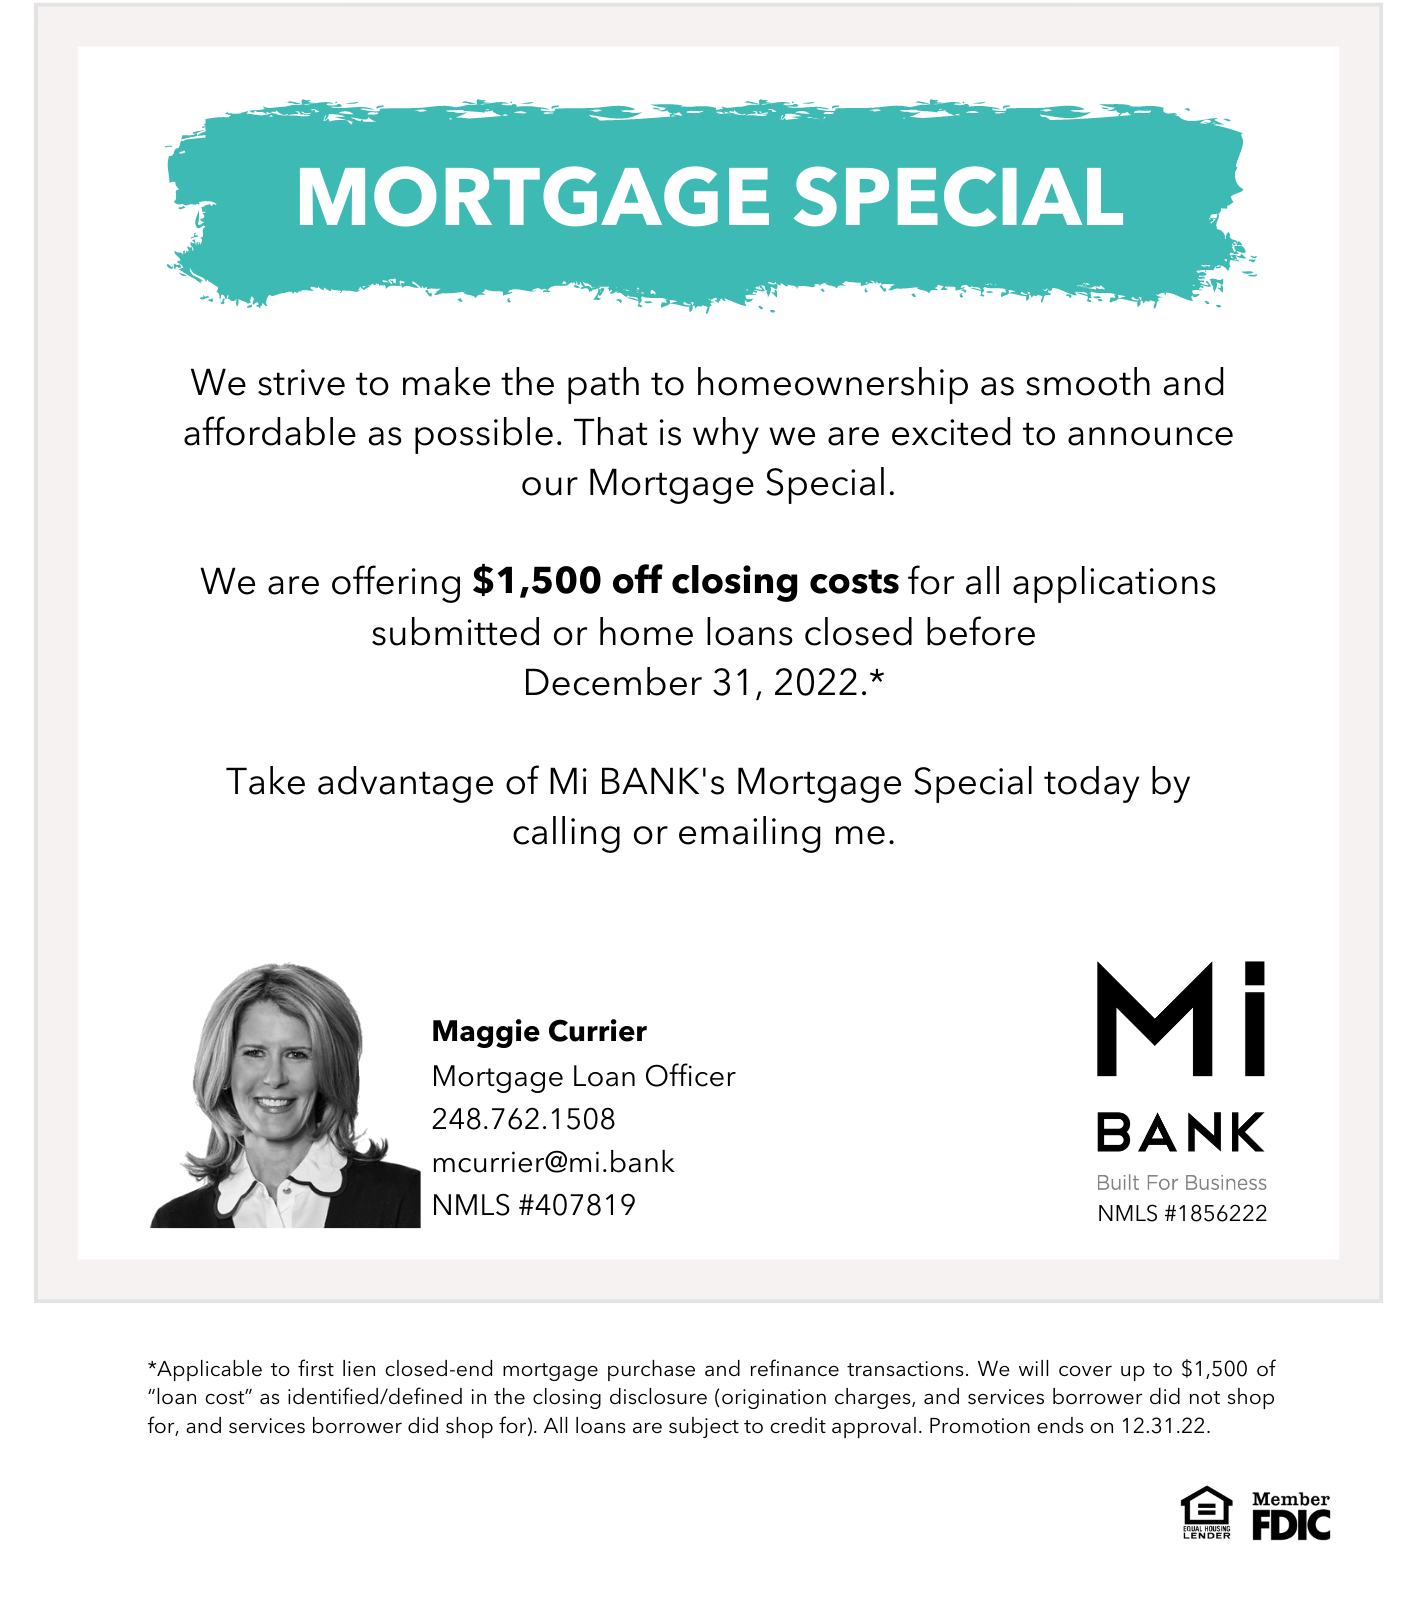 Mortgage Special